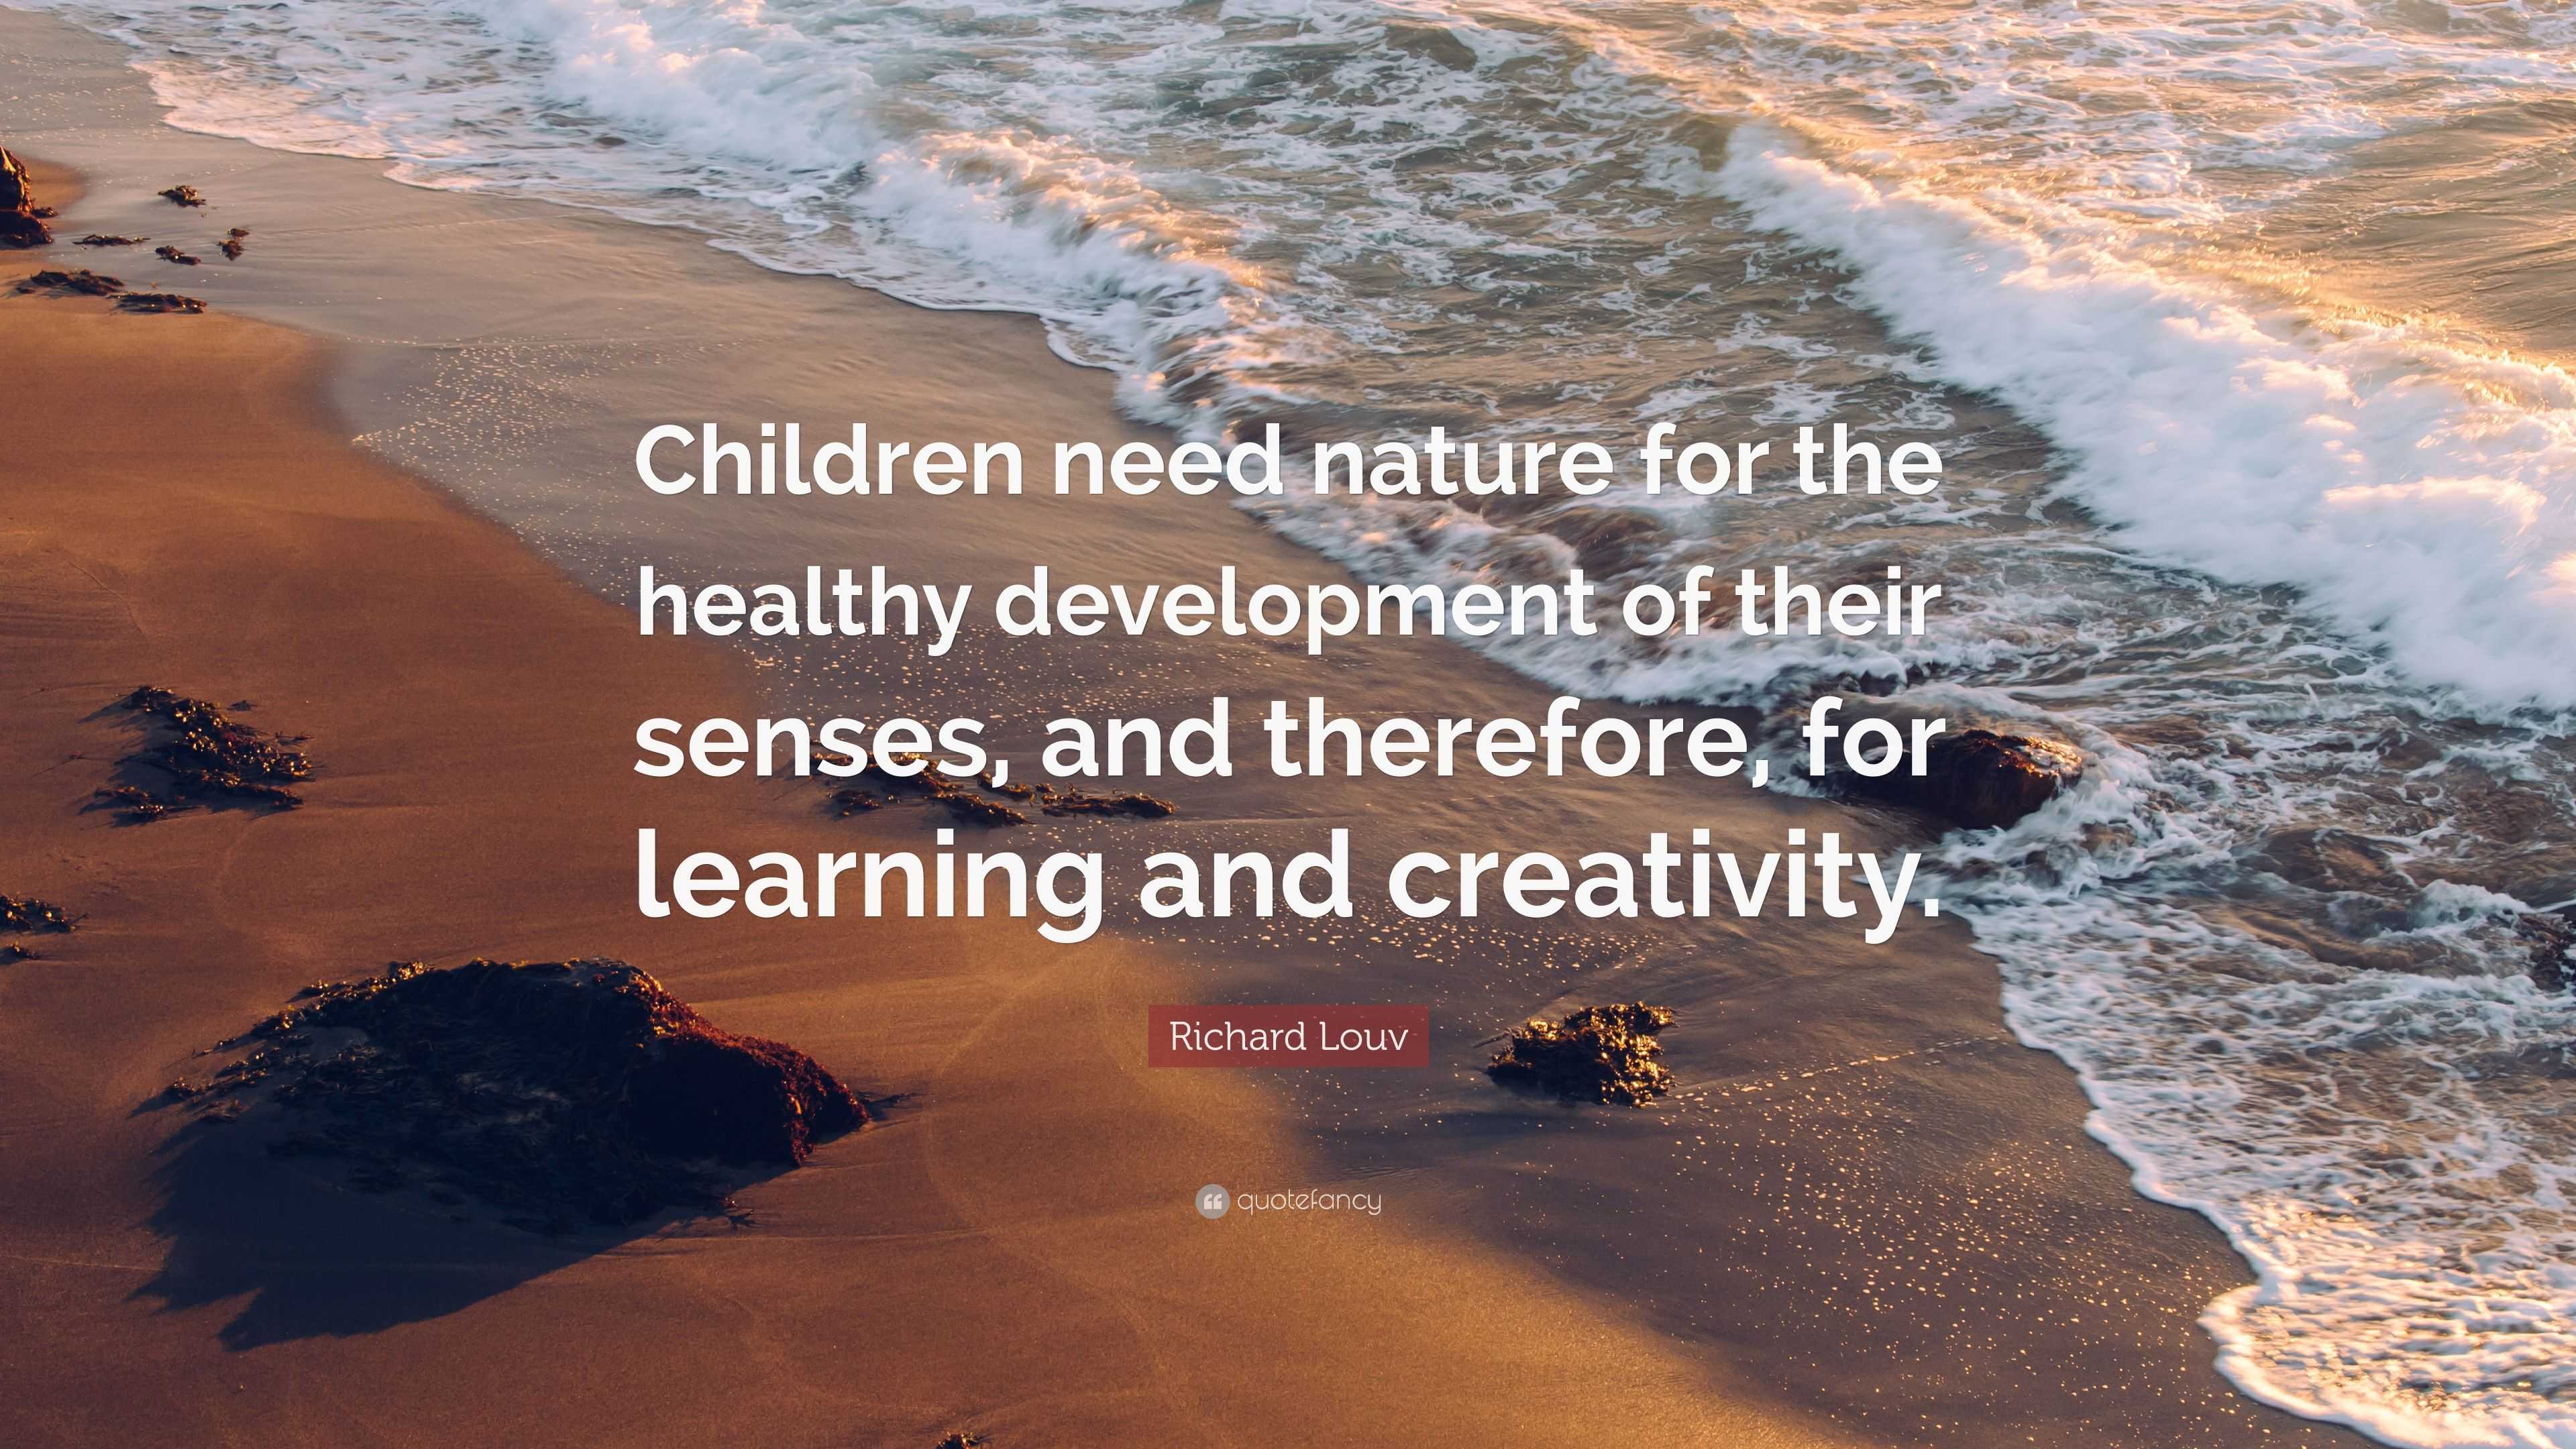 Richard Louv Quote: “Children need nature for the healthy development